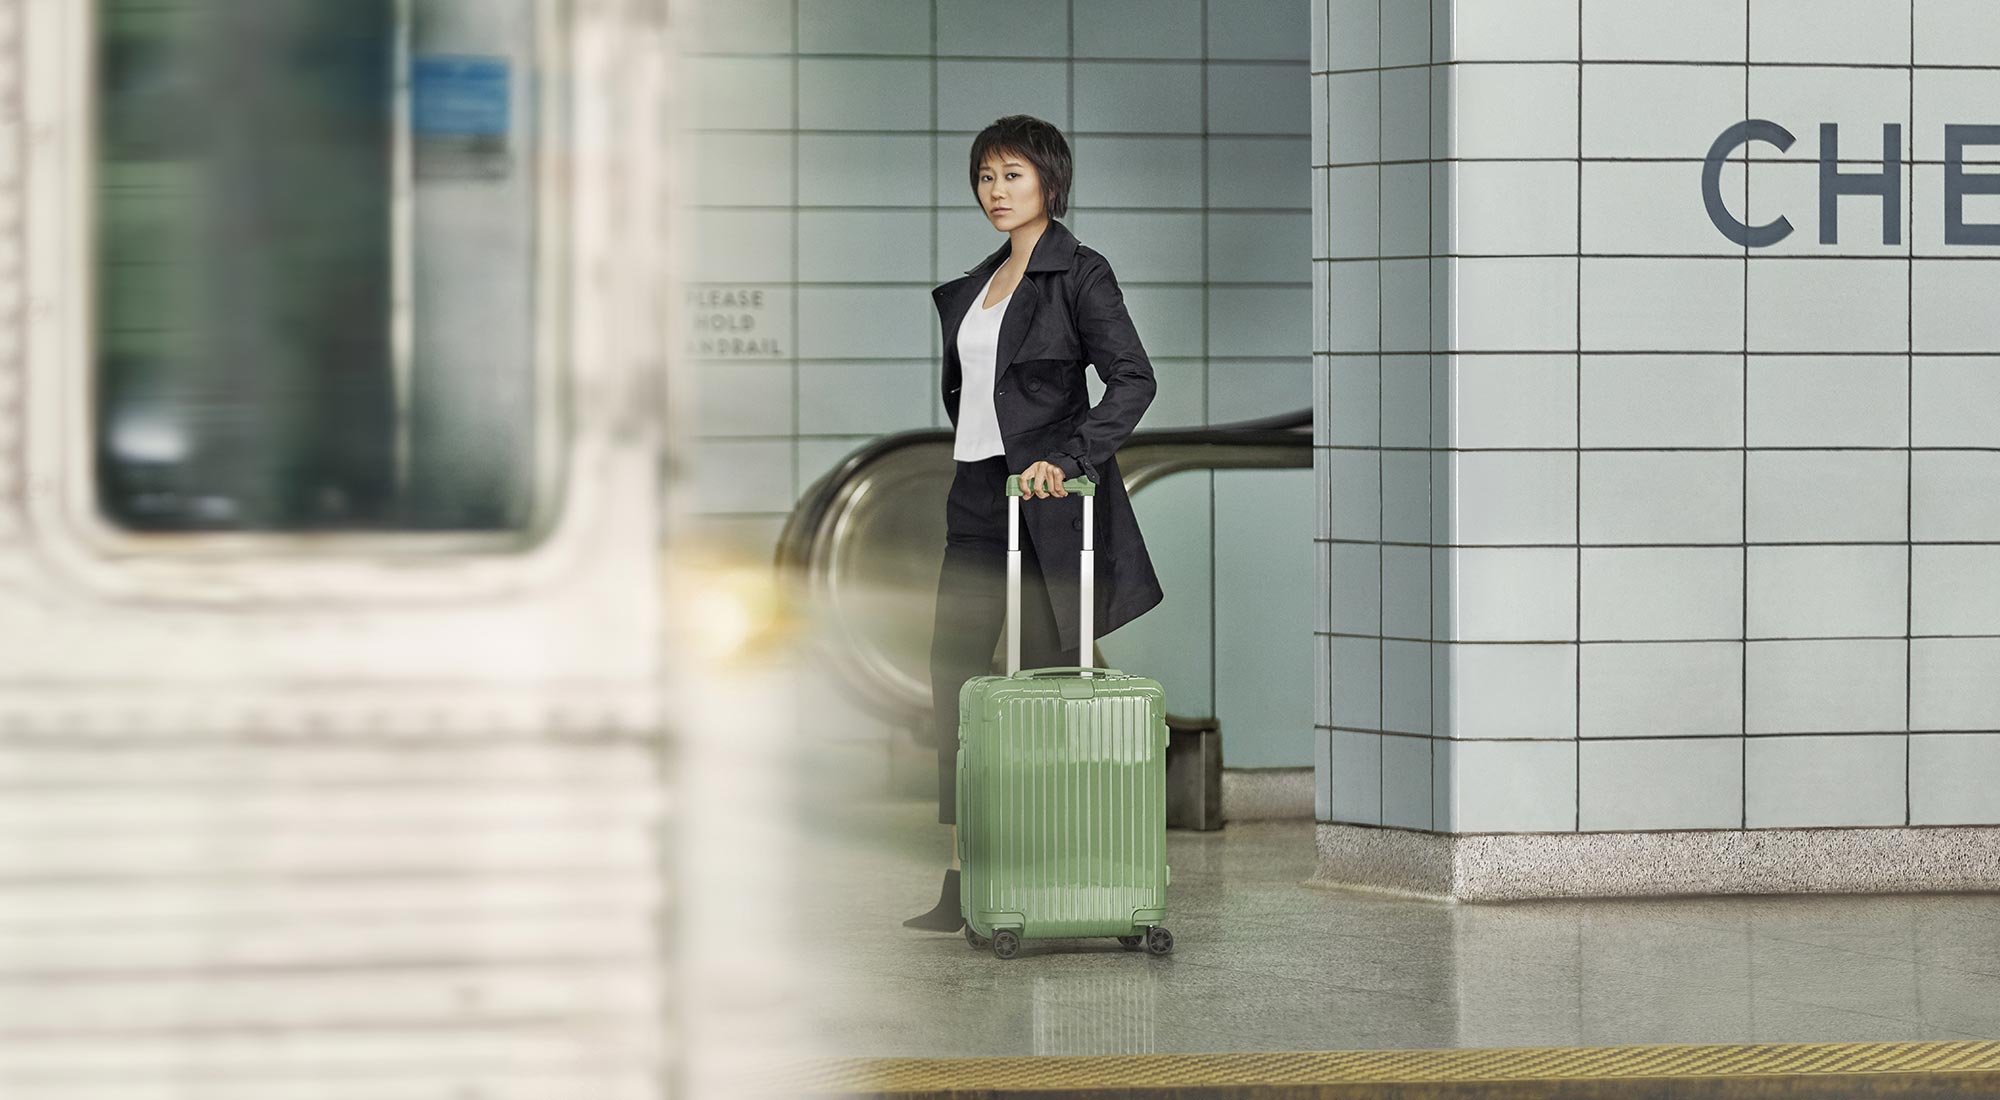 Rimowa: A Lifetime of Memories • Ads of the World™